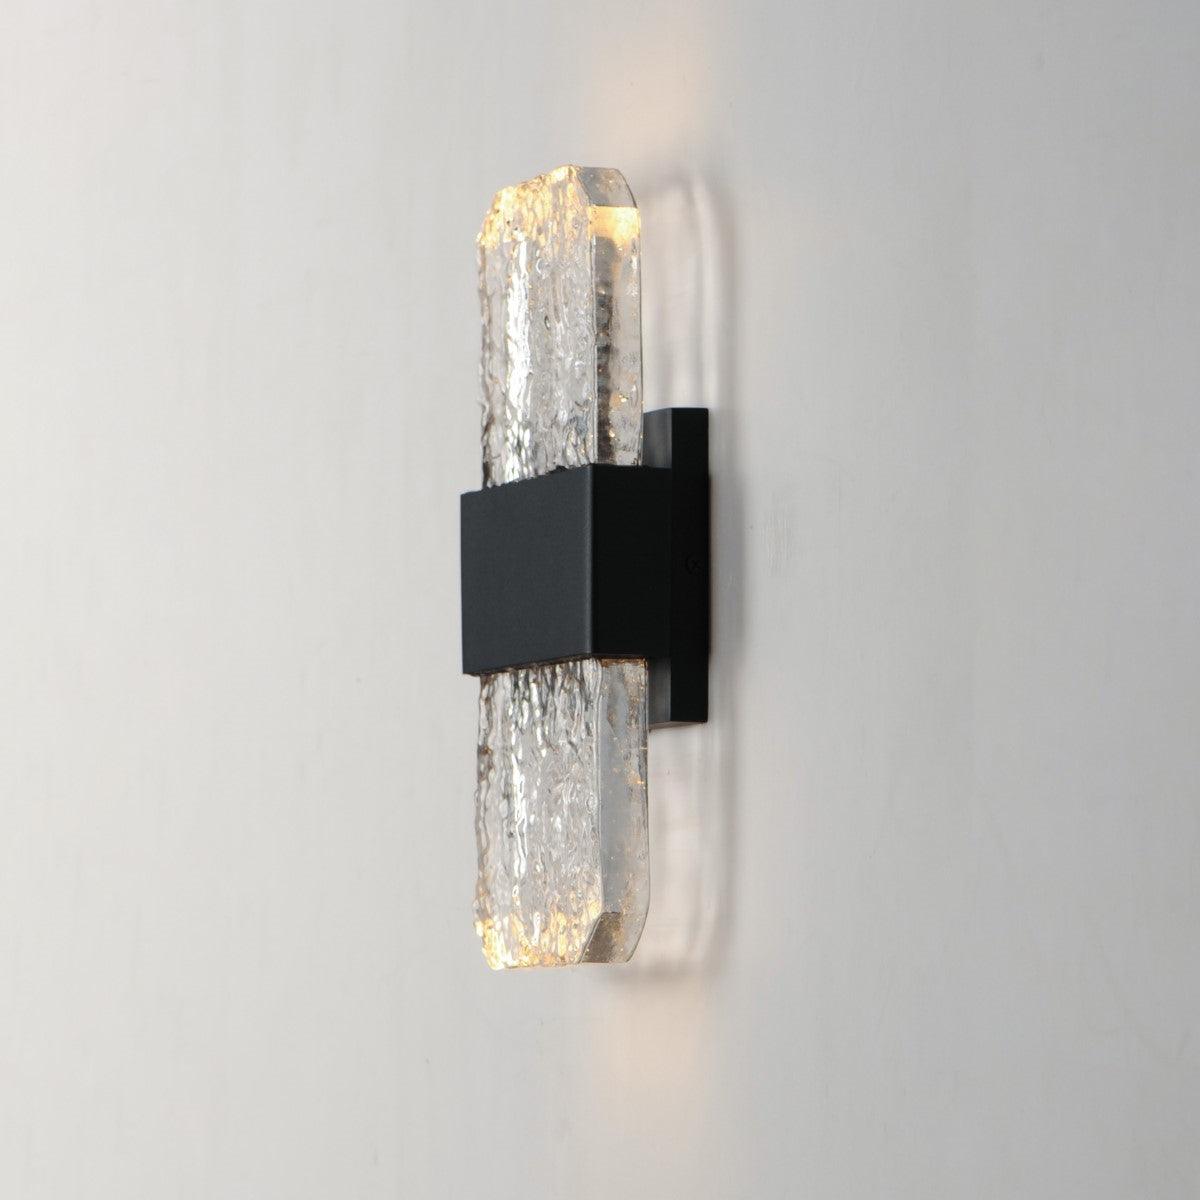 Rune 12 in. LED Outdoor Wall Sconce 3000K Black Finish